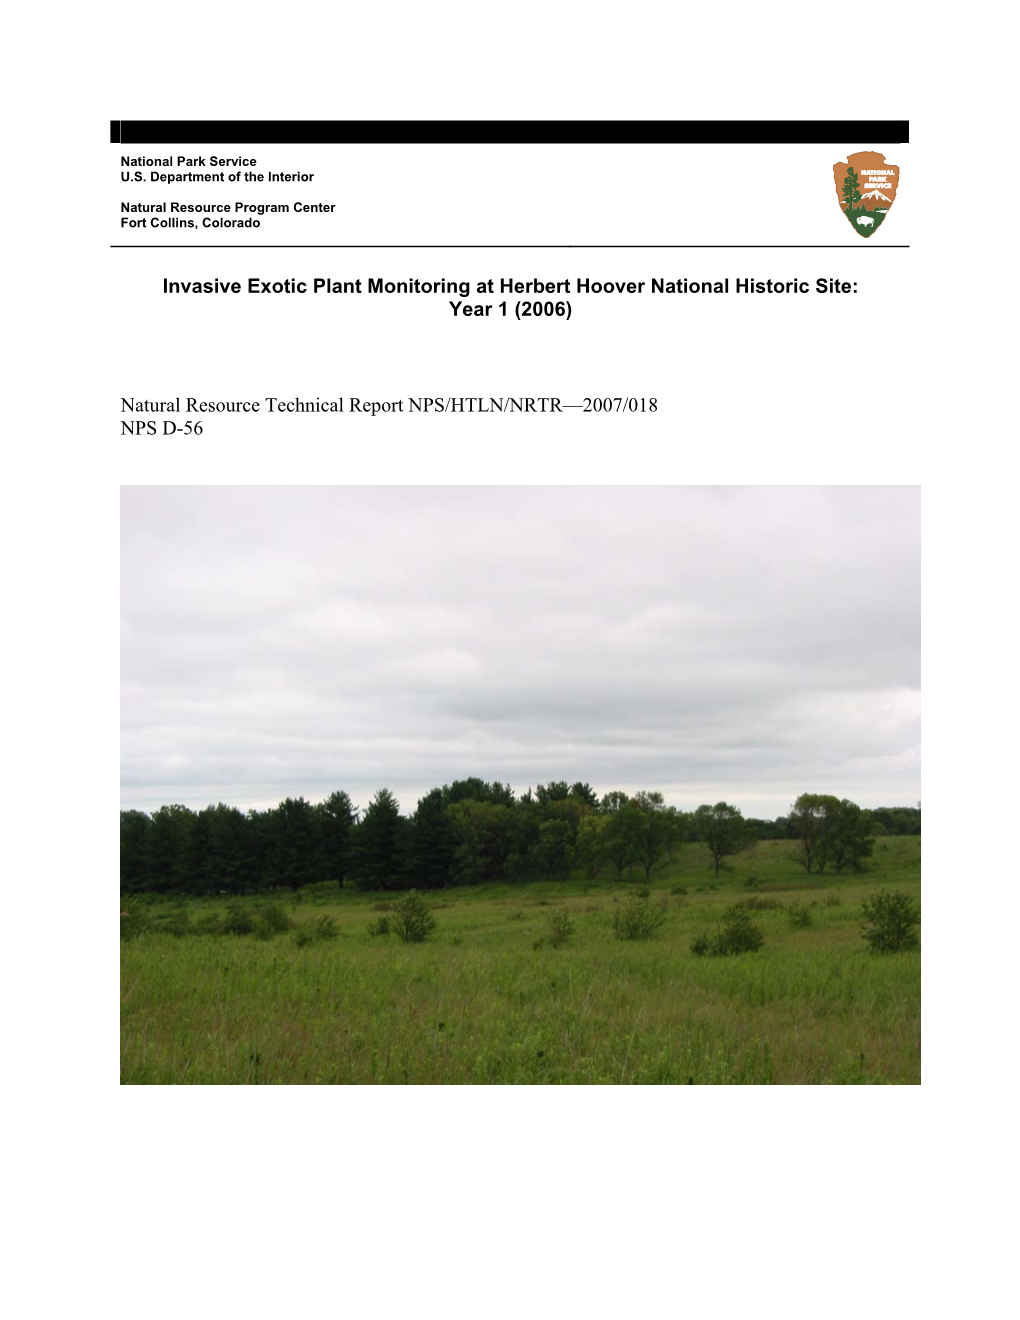 Invasive Exotic Plant Monitoring at Herbert Hoover National Historic Site: Year 1 (2006)